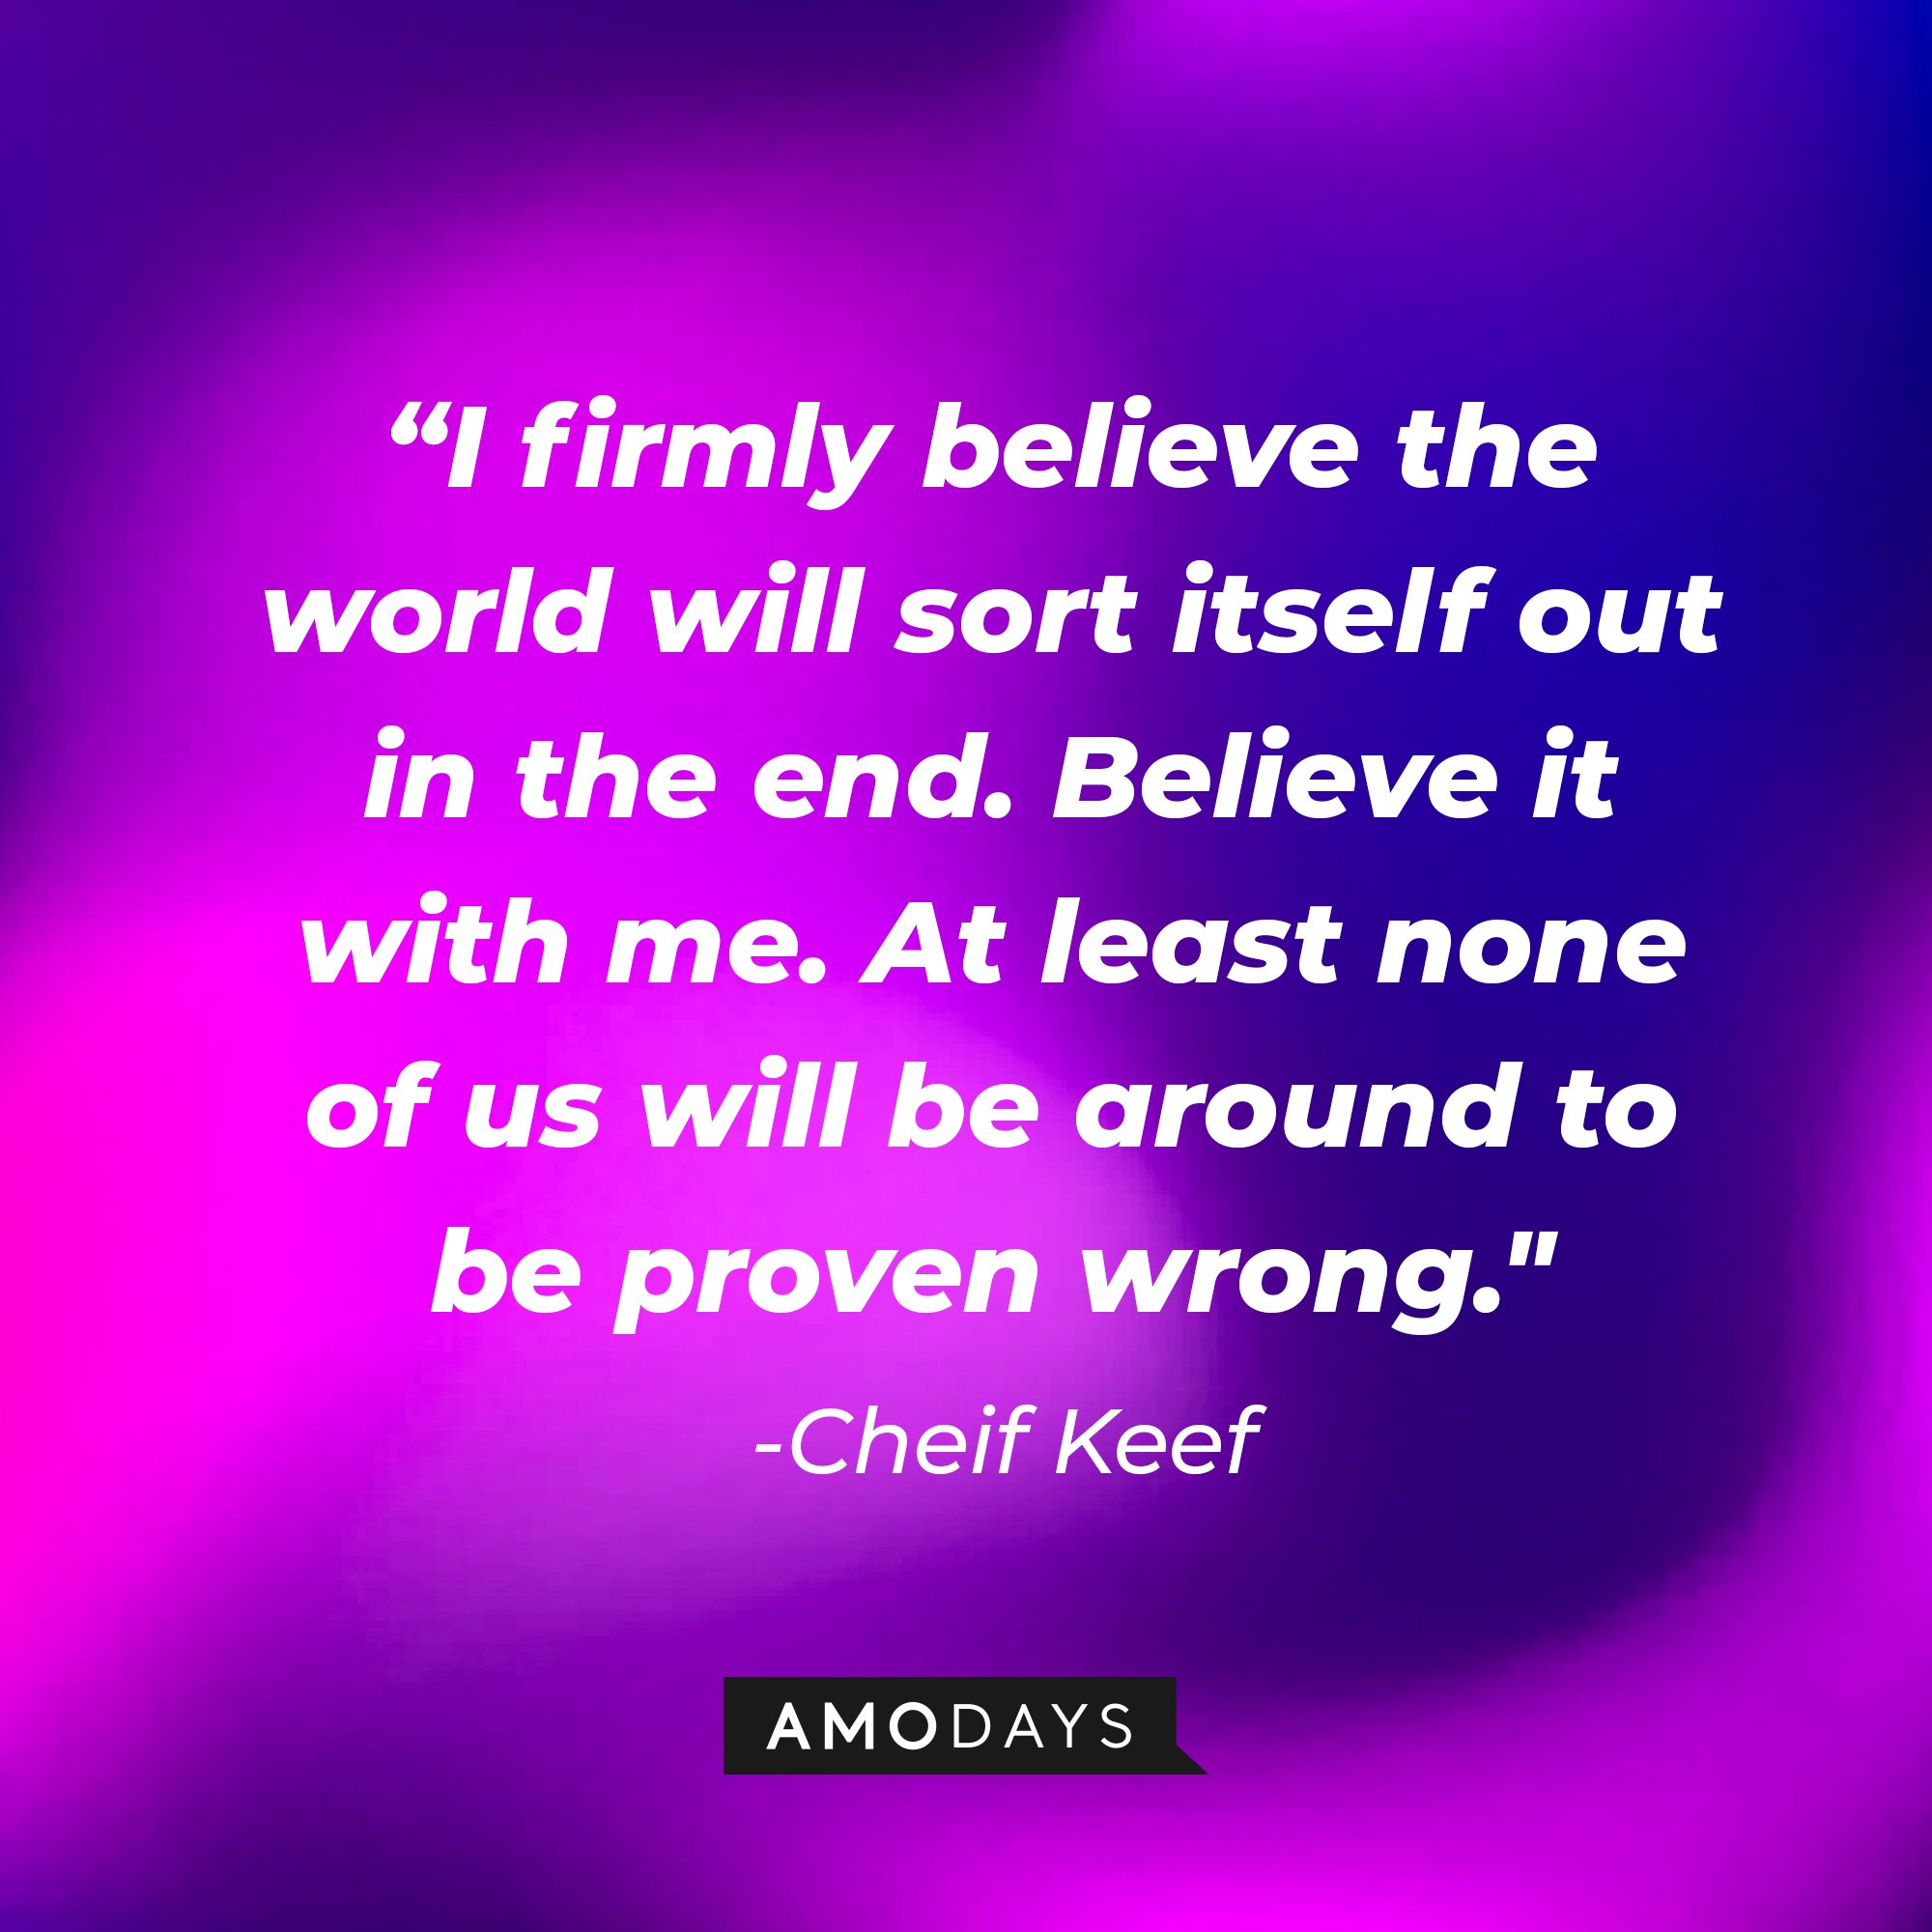  Chief Keef’s quote: “I firmly believe the world will sort itself out in the end. Believe it with me. At least none of us will be around to be proven wrong." | Image: AmoDays 